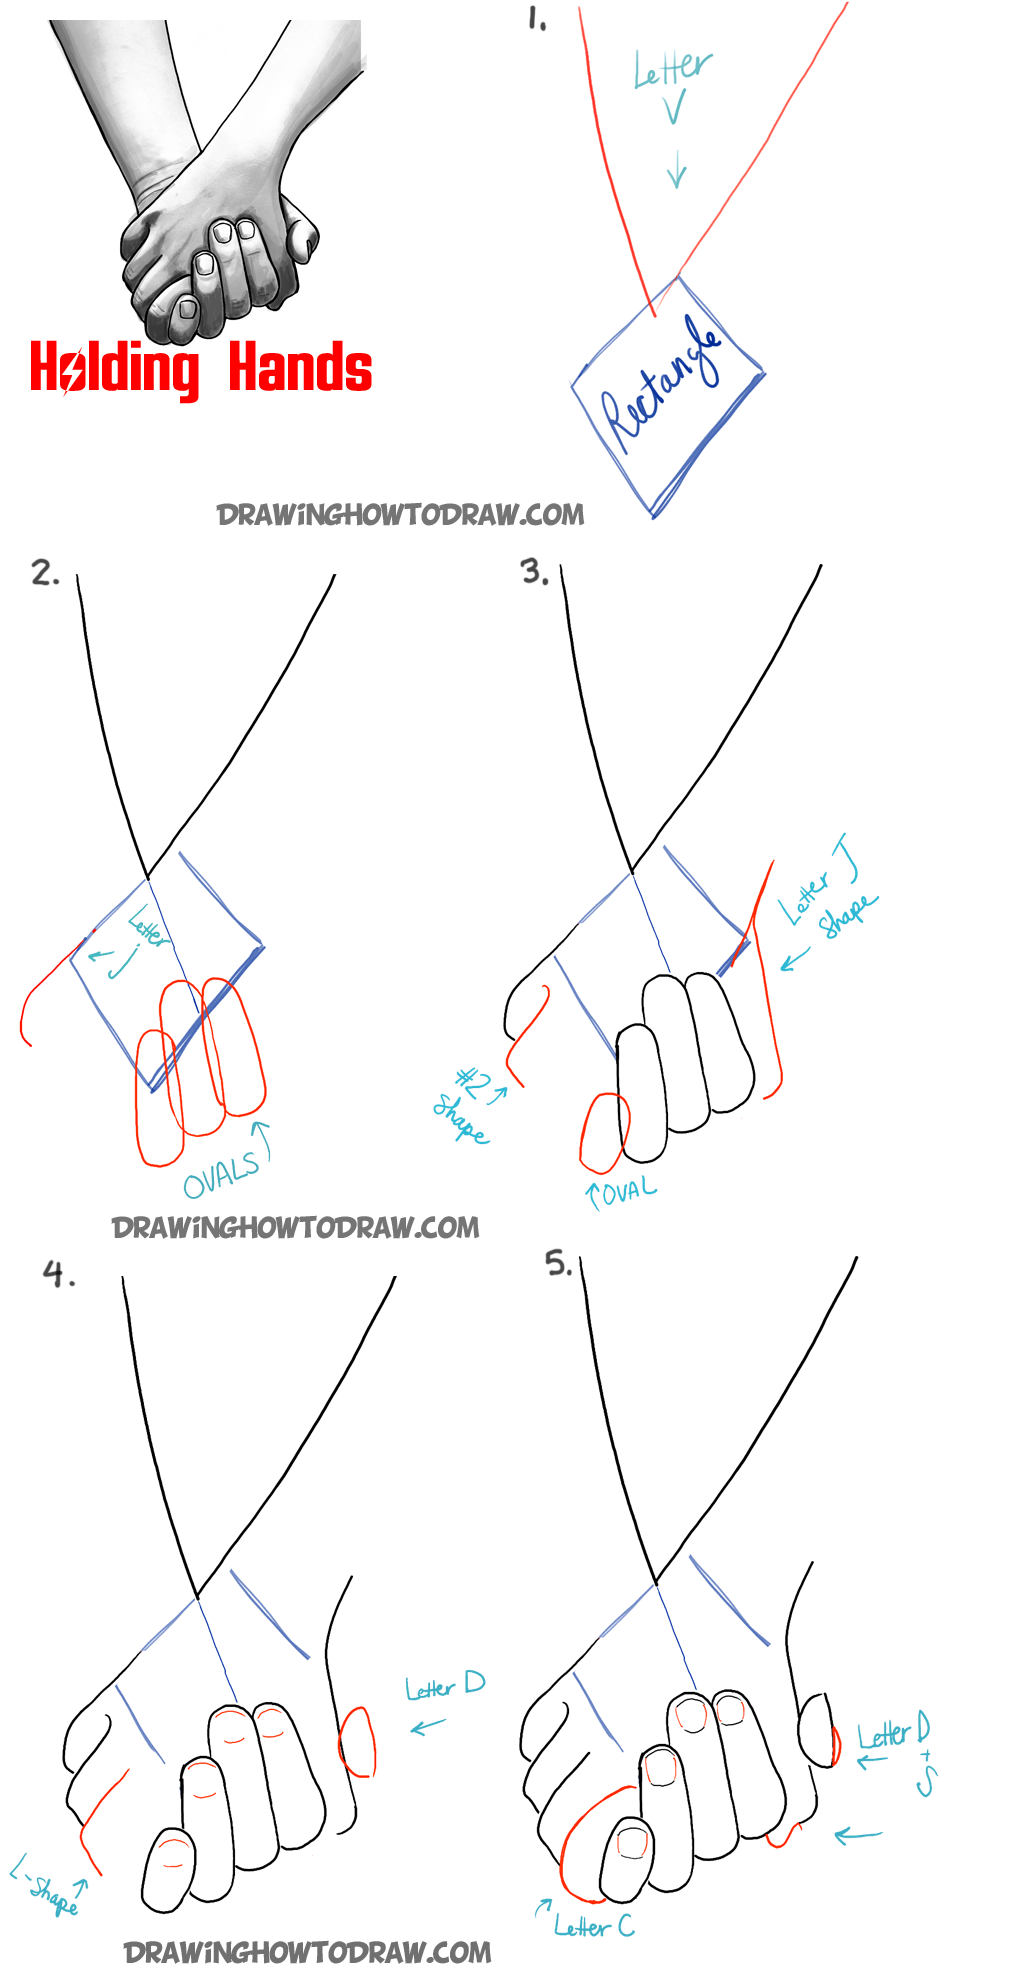 Here are the Steps to drawing two people holding hands: